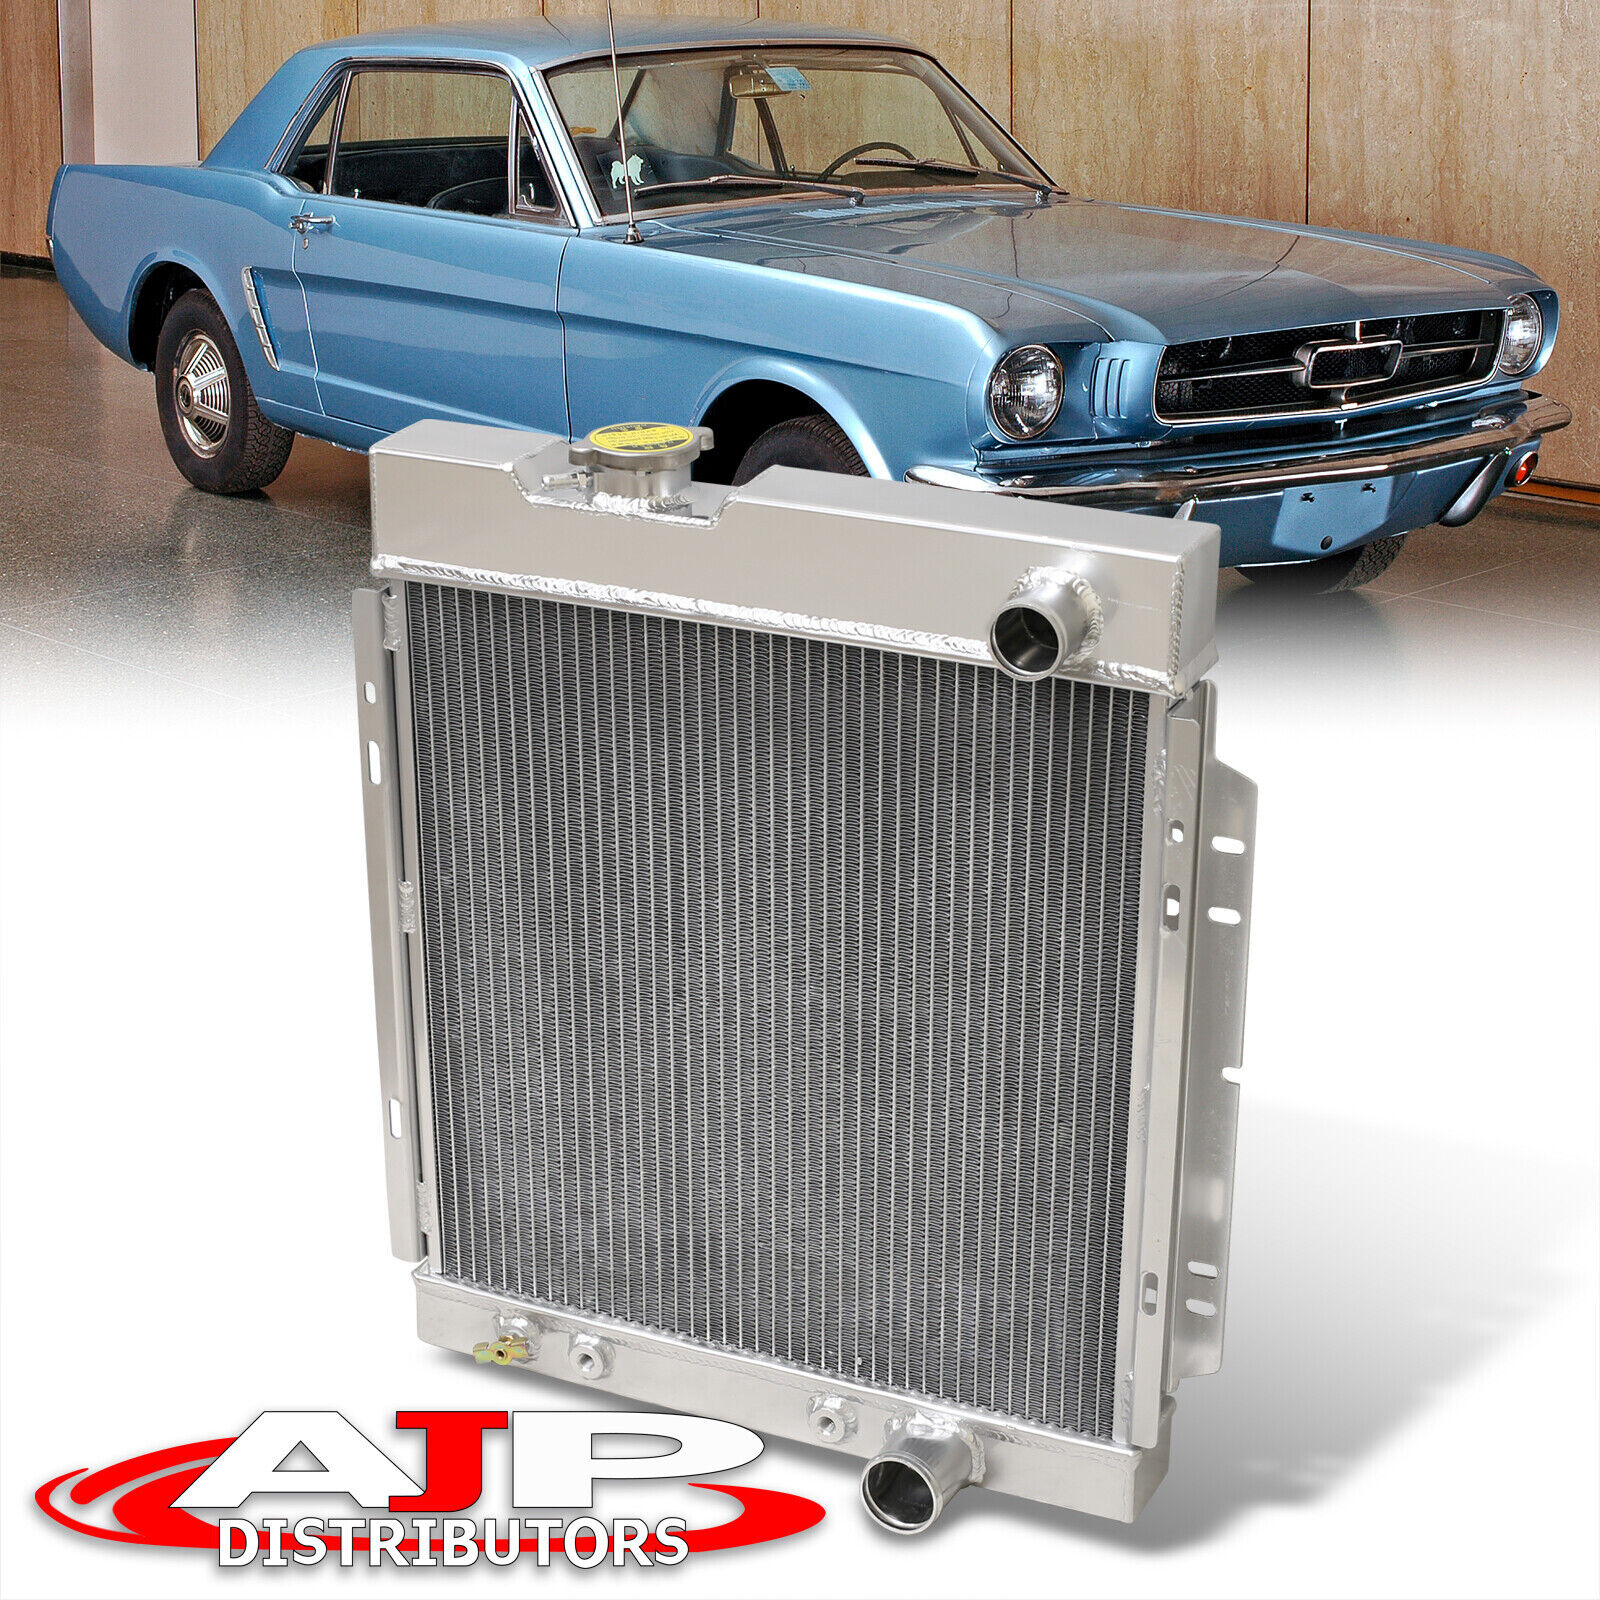 TriCore Engine Aluminum Cooling Radiator For 1964-1966 Ford Mustang Falcon Comet